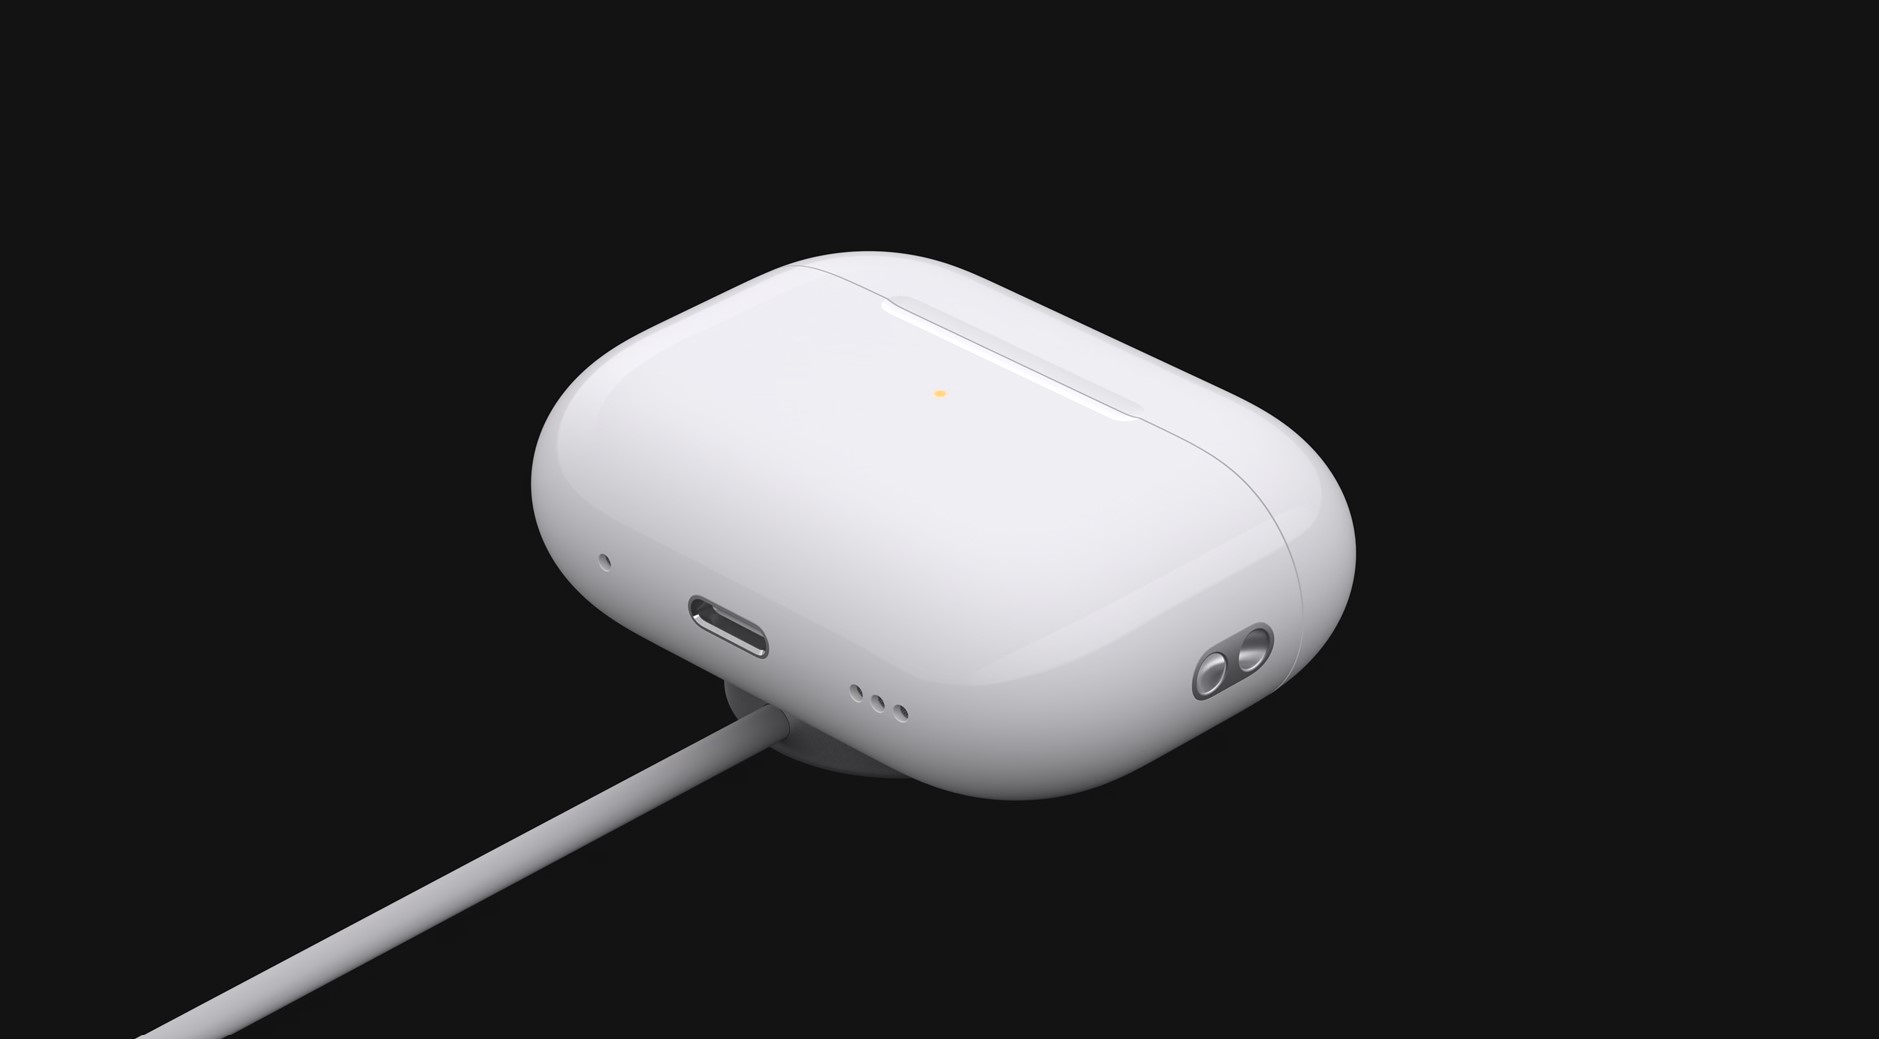 New charging case of Apple AirPods Pro 2